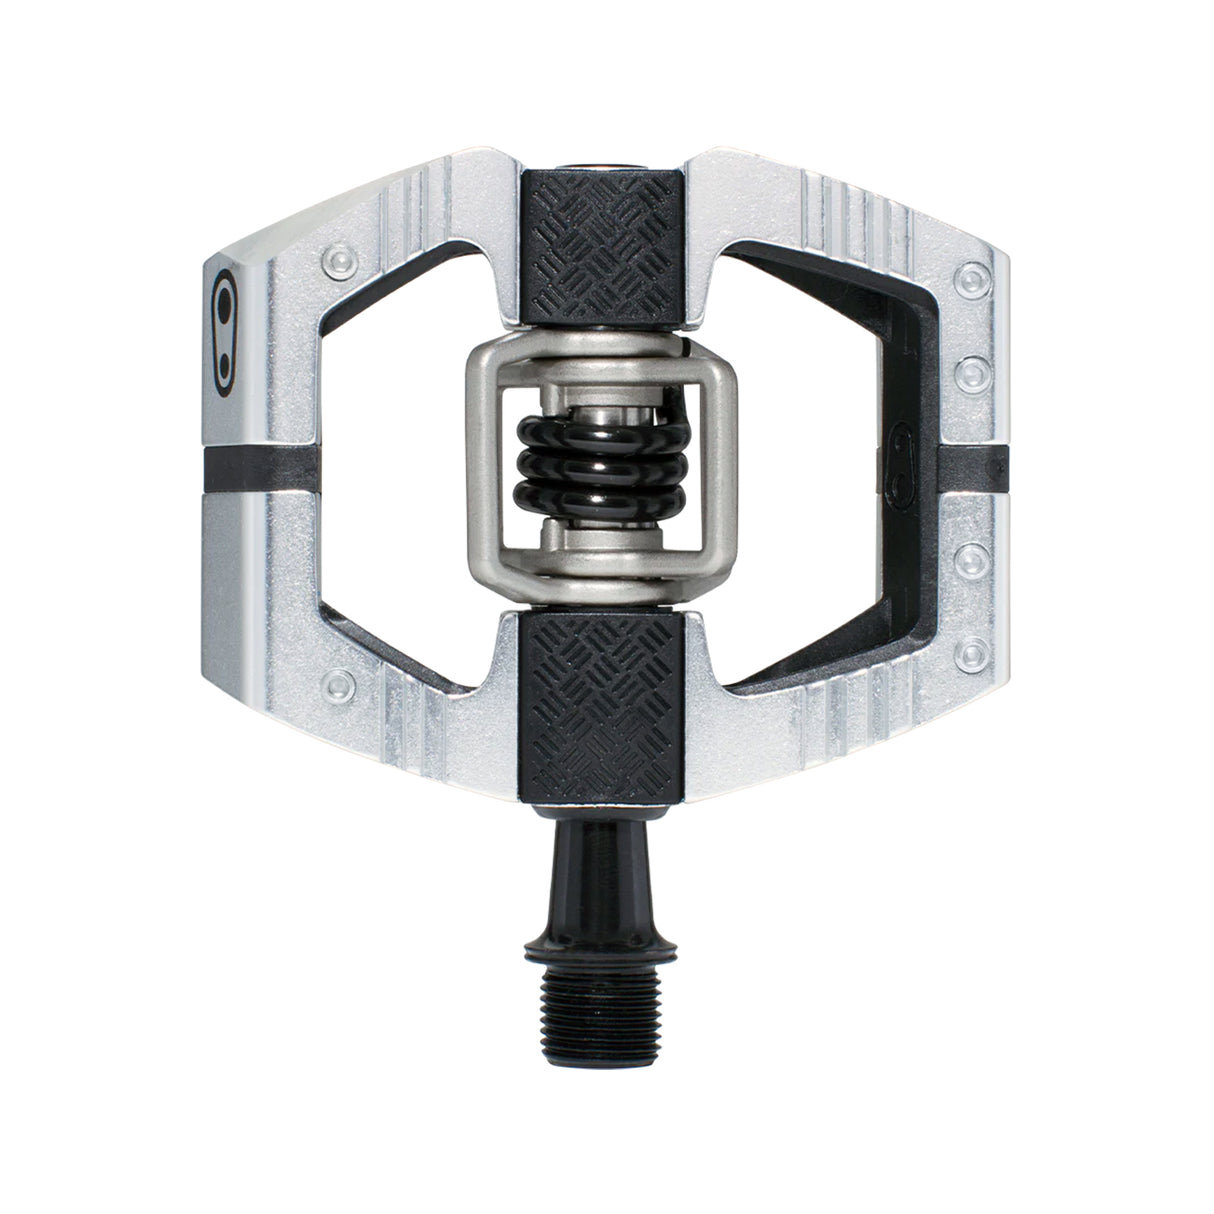 Crankbrothers Mallet E Silver Edition Pedal